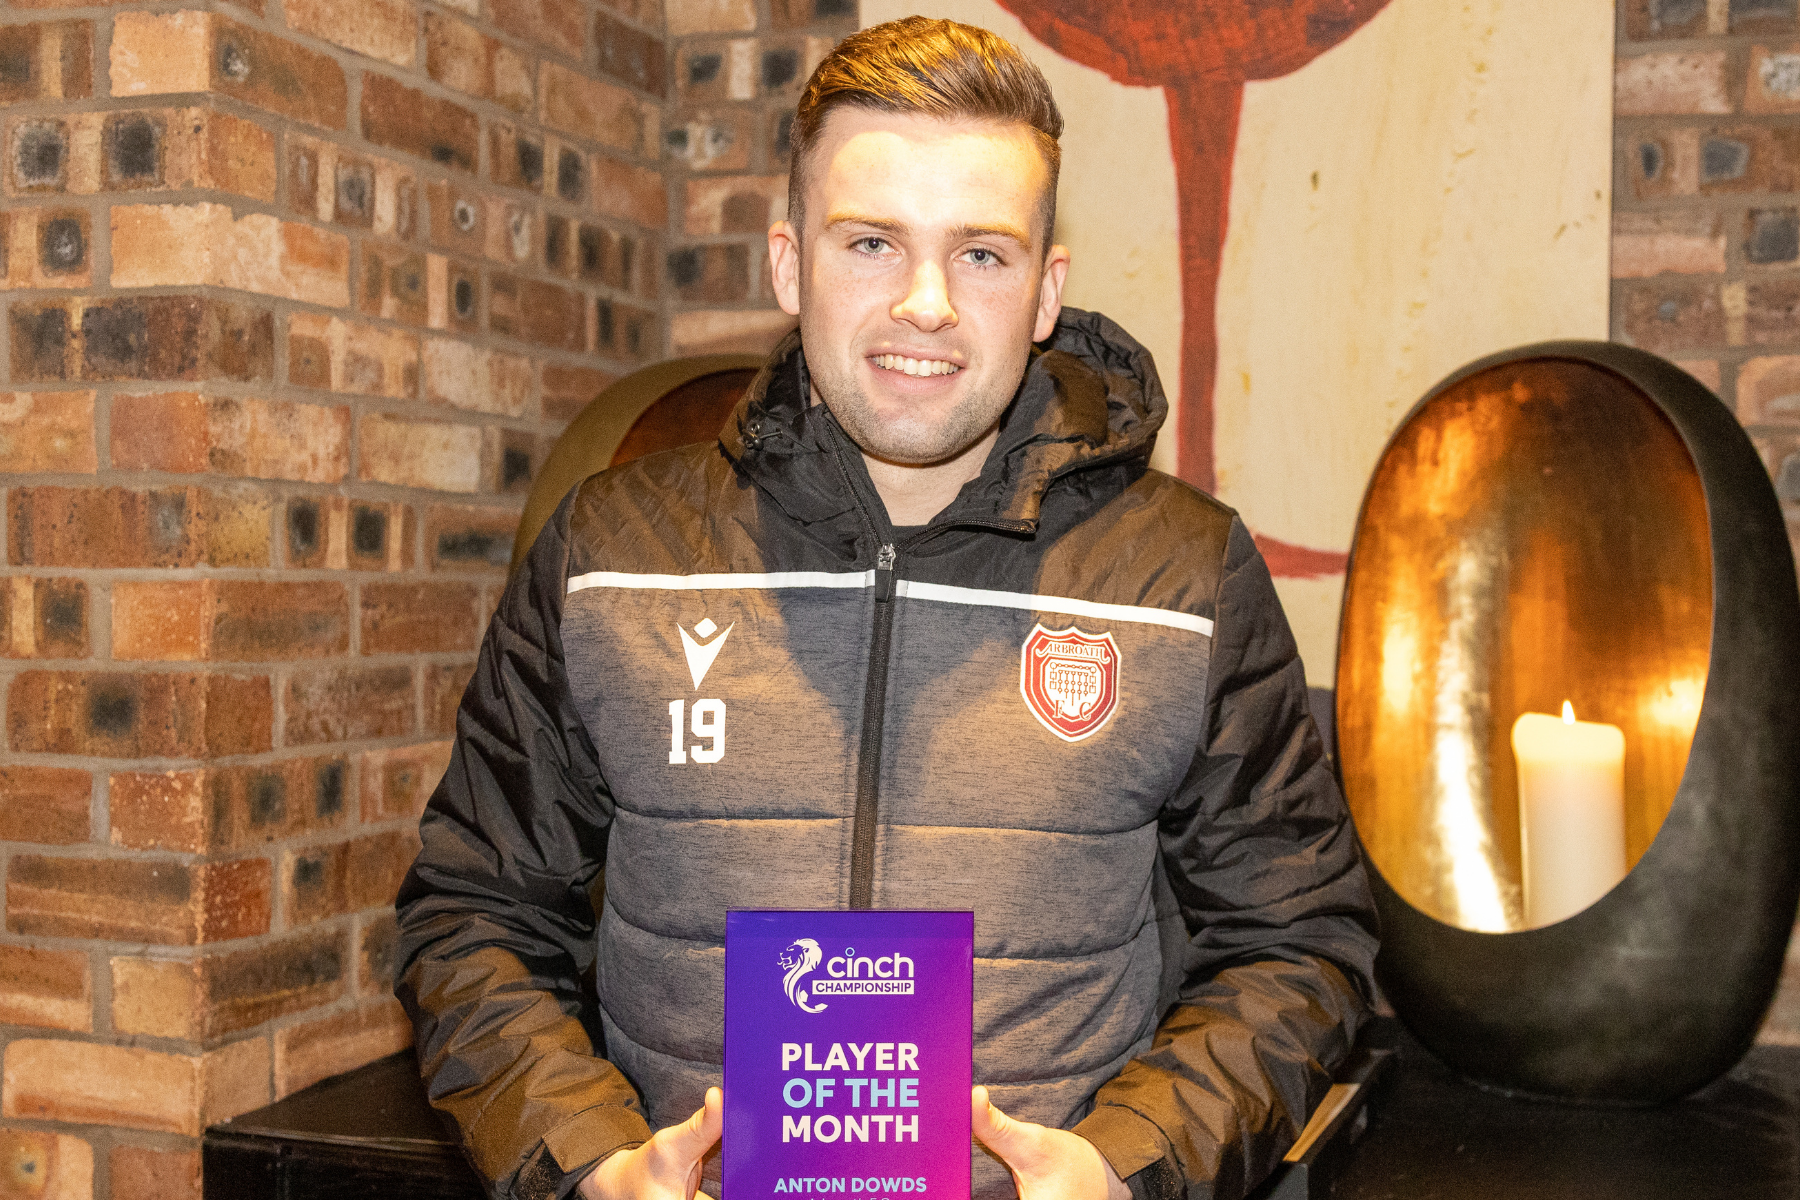 Anton Dowds awarded Championship Player of the Month